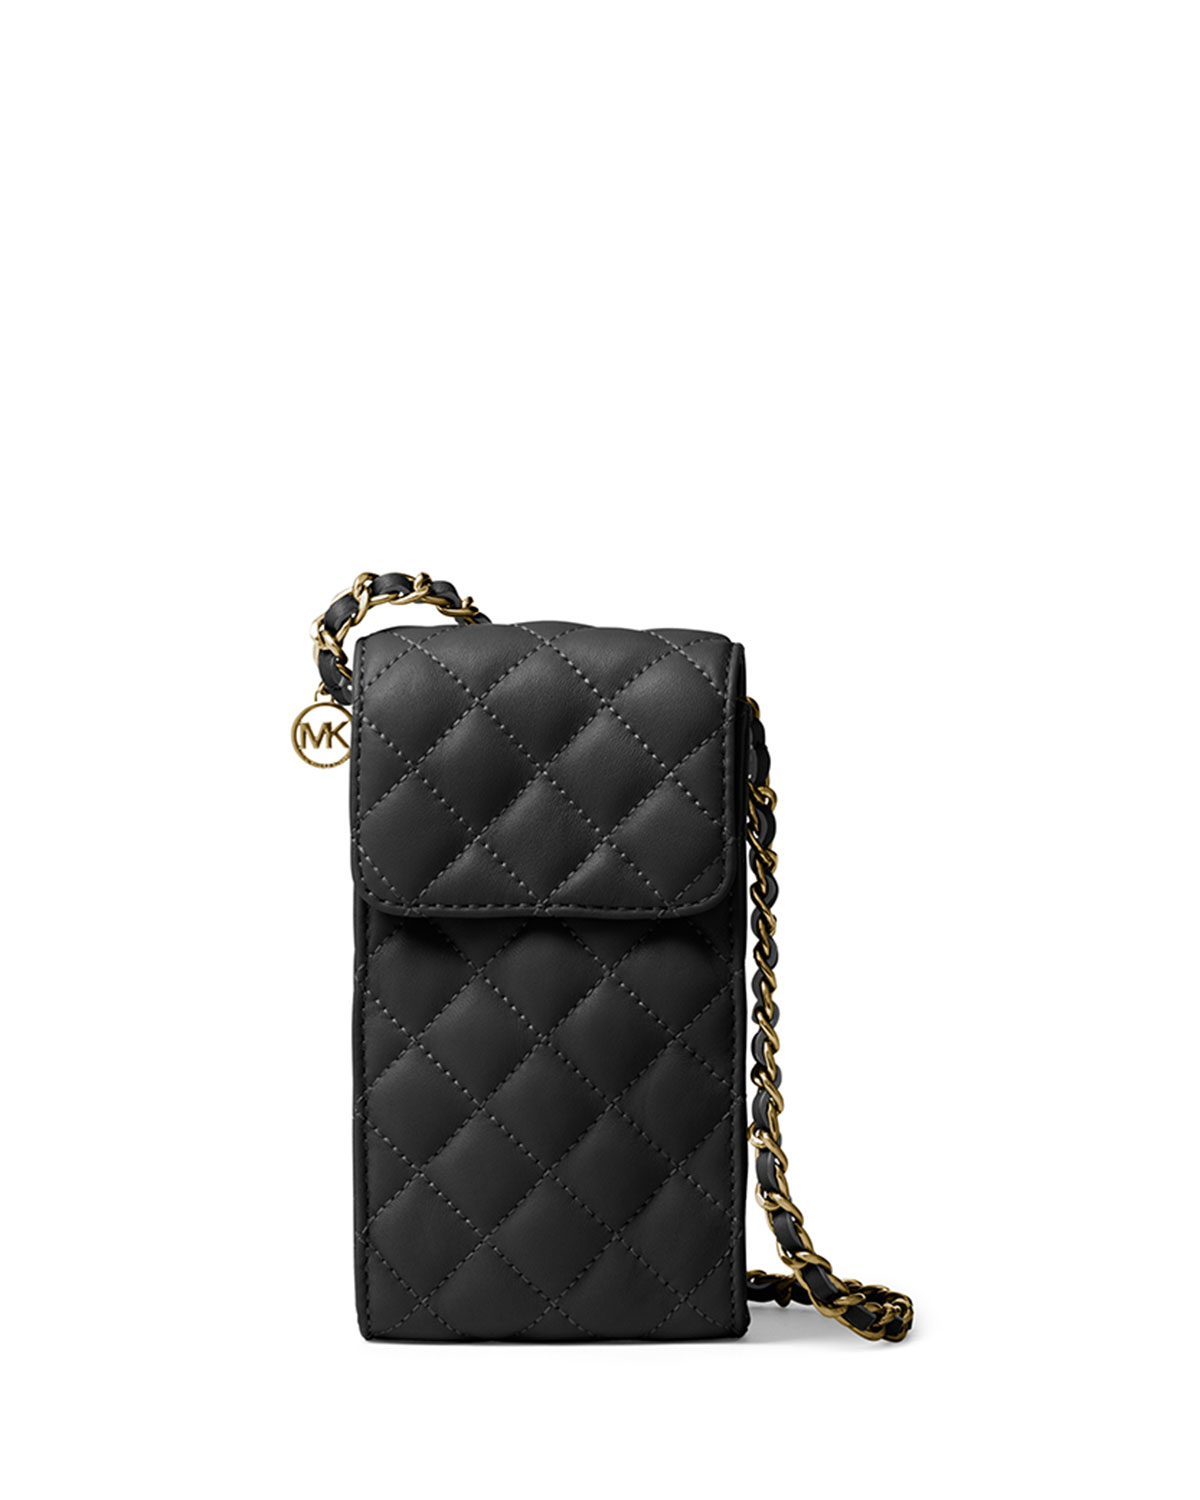 Lyst - Michael Michael Kors Sloan Phone Quilted Chain Crossbody Bag in Black